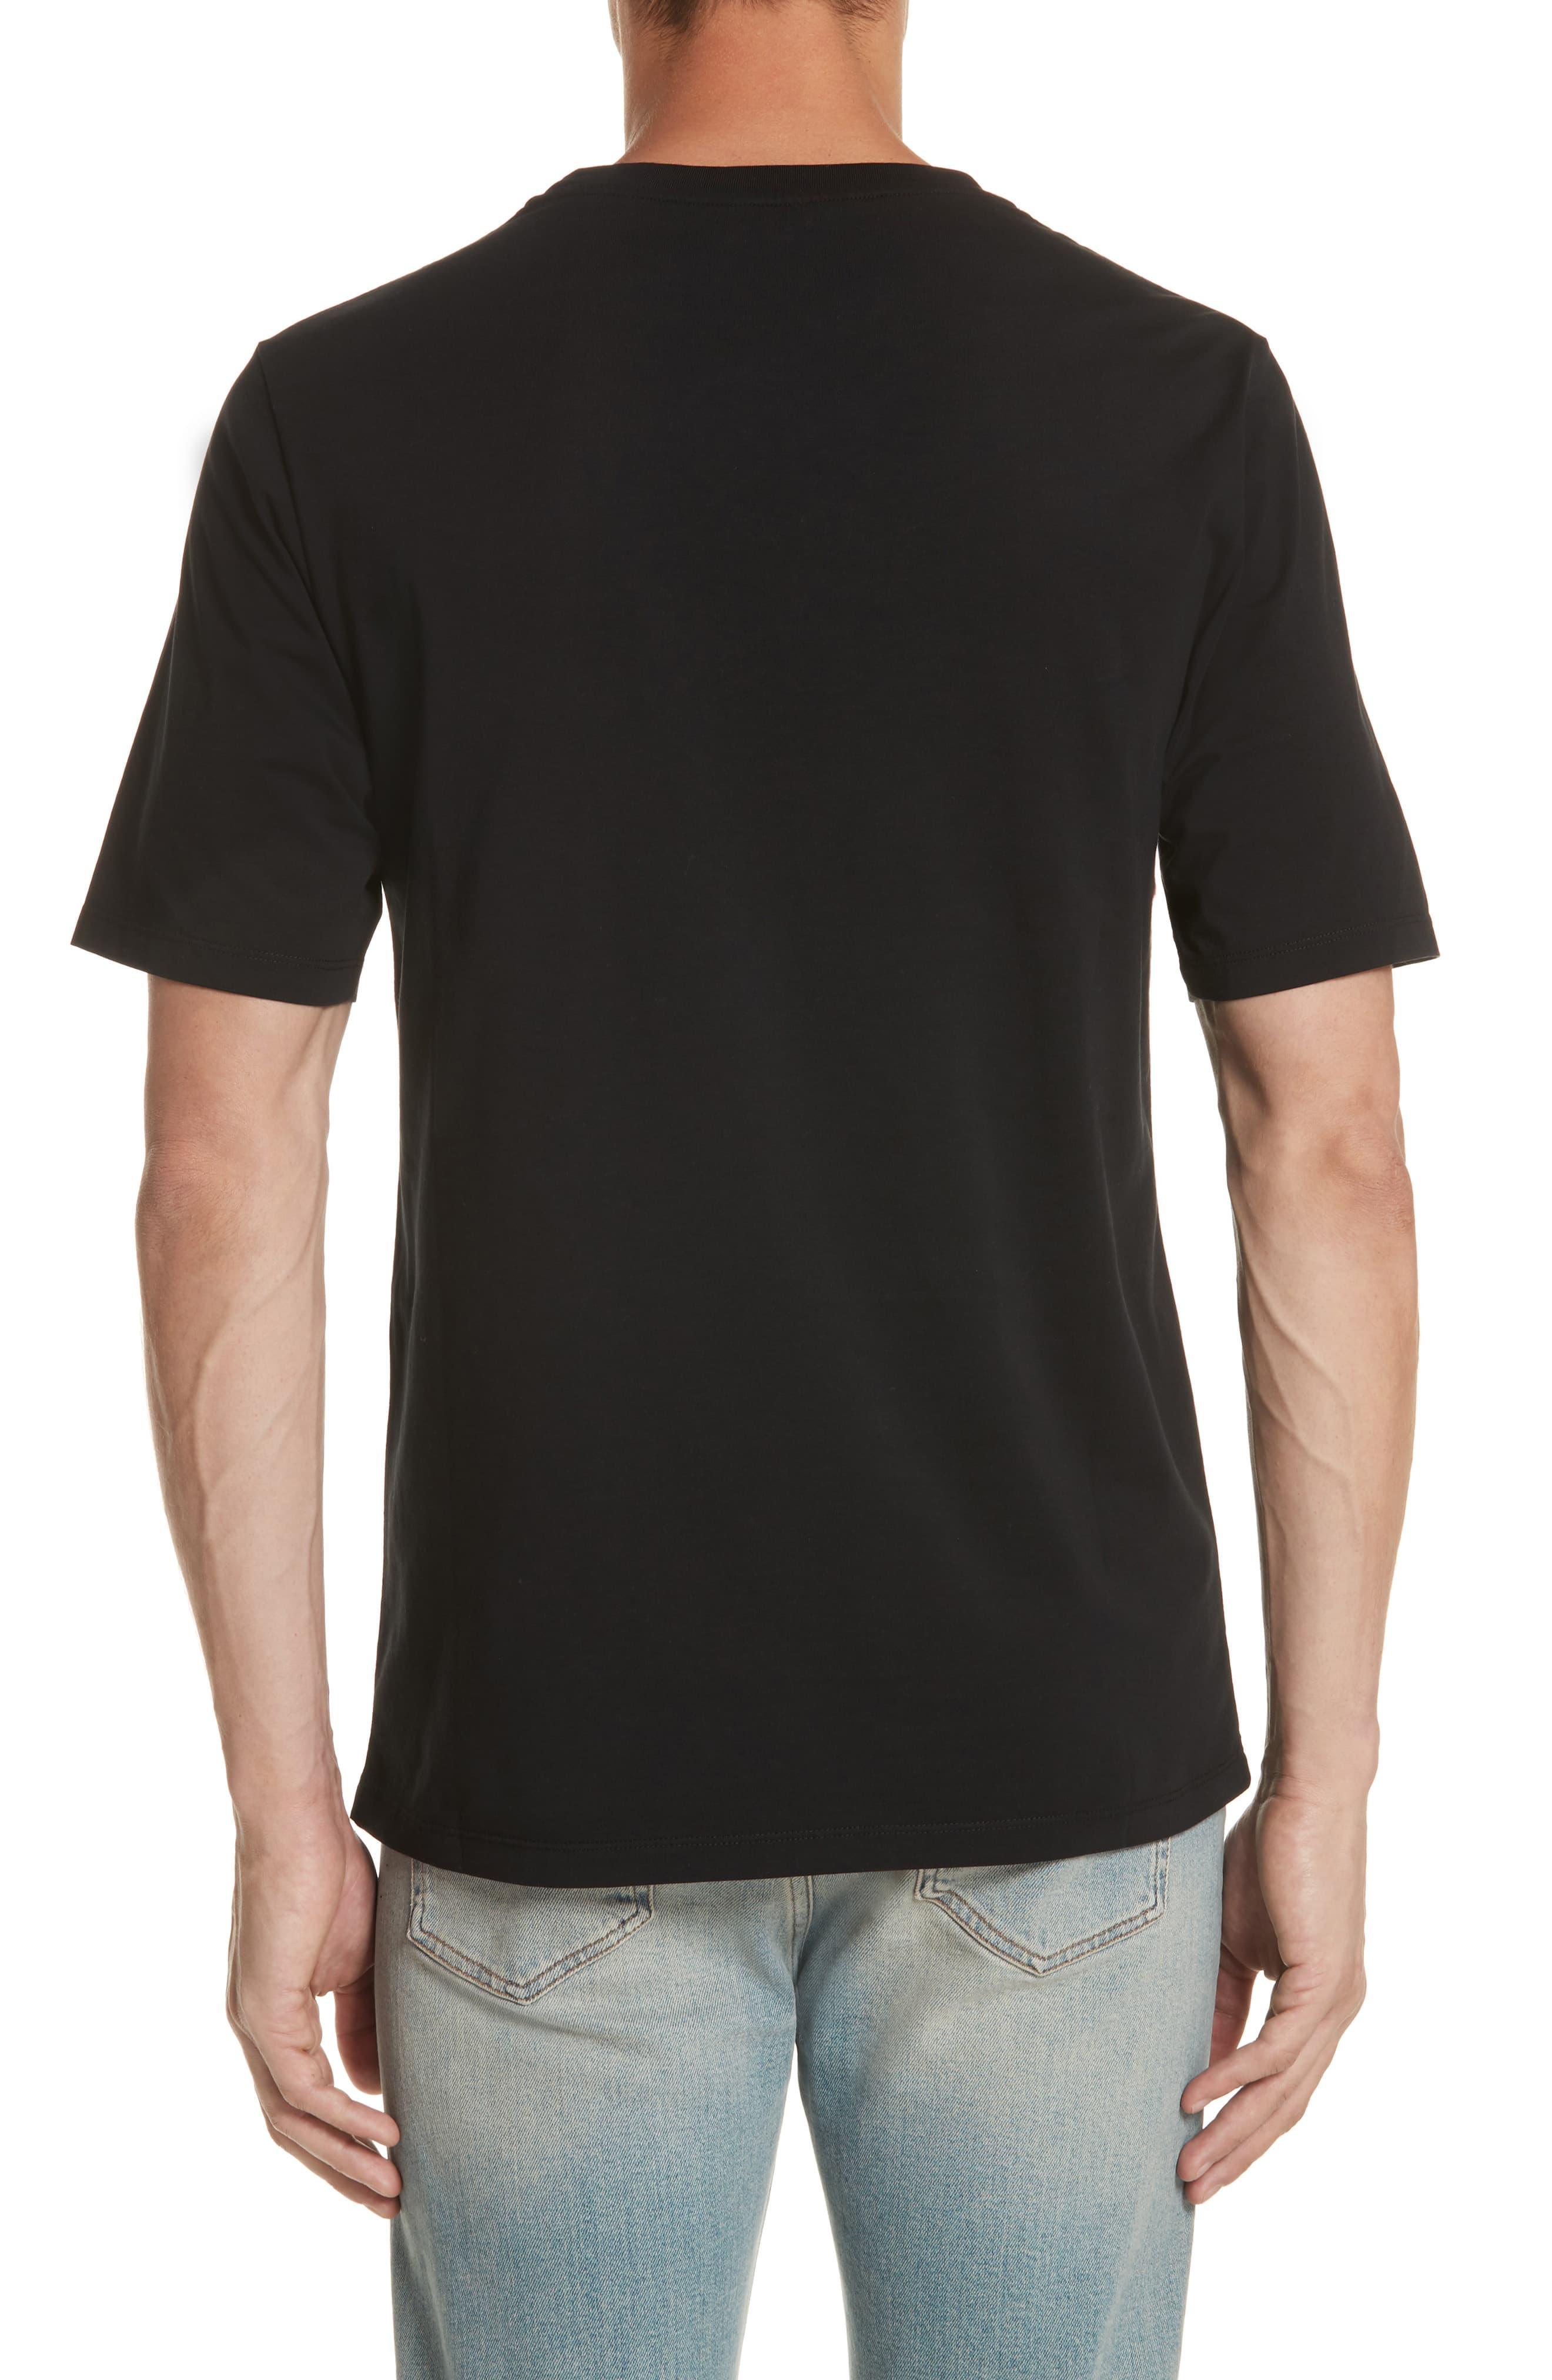 Loewe Leather Logo Embroidered Cotton T Shirt in Black for Men - Lyst